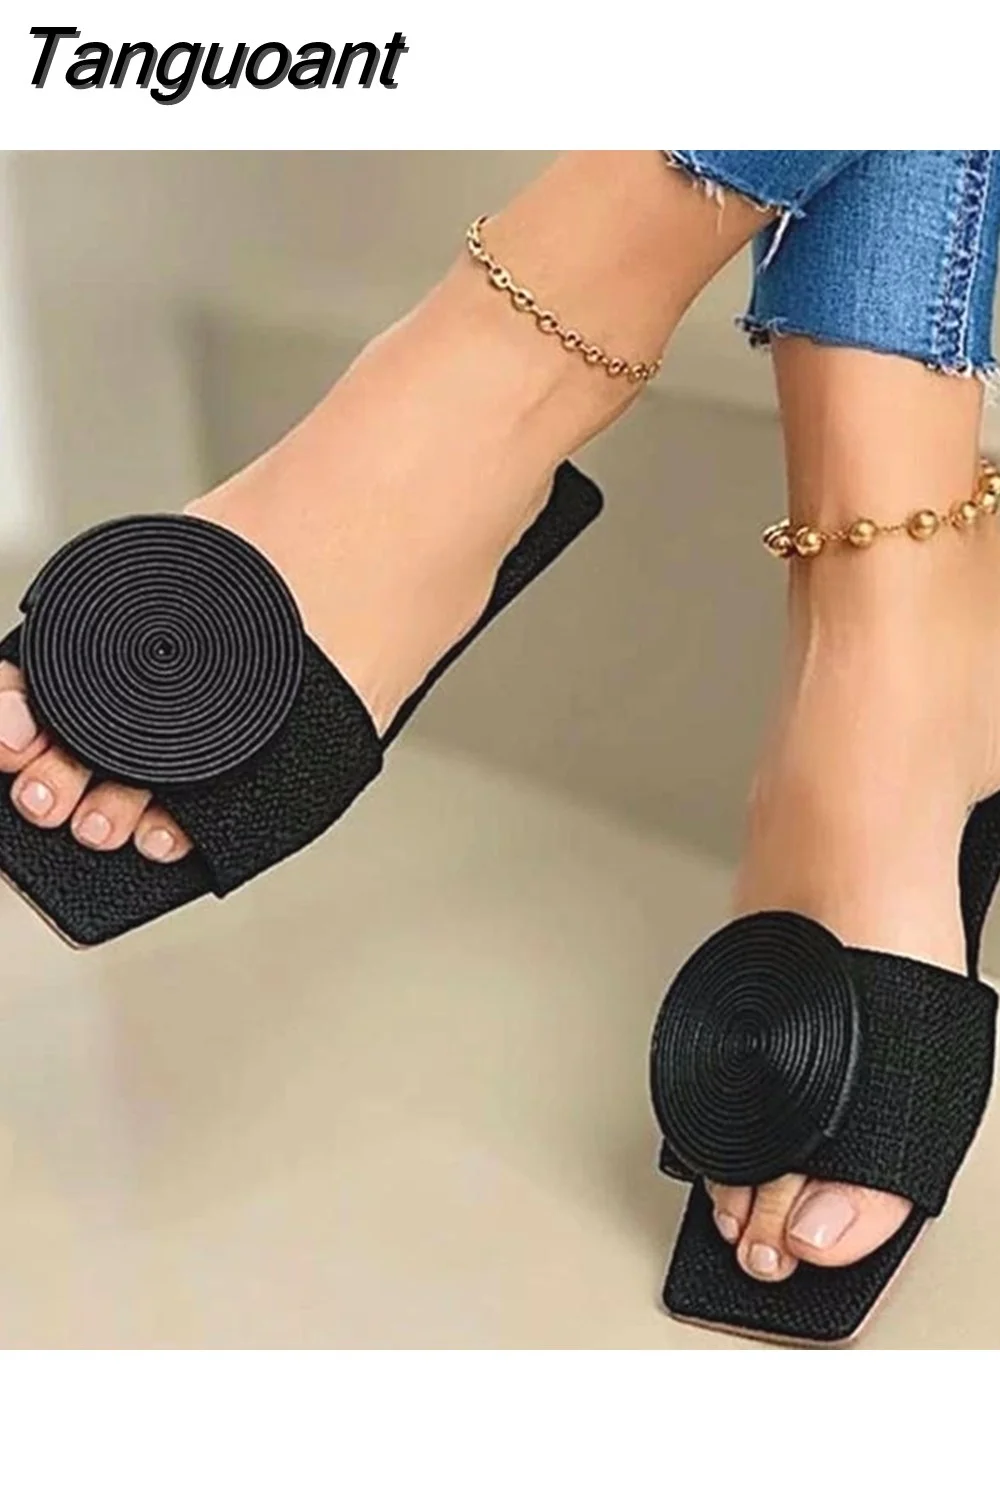 Tanguoant New Fashion Beach Shoes Woman Summer Flat Sandals Plus Size Round Buckle Solid Flats Female Casual Slippers Ladies Women